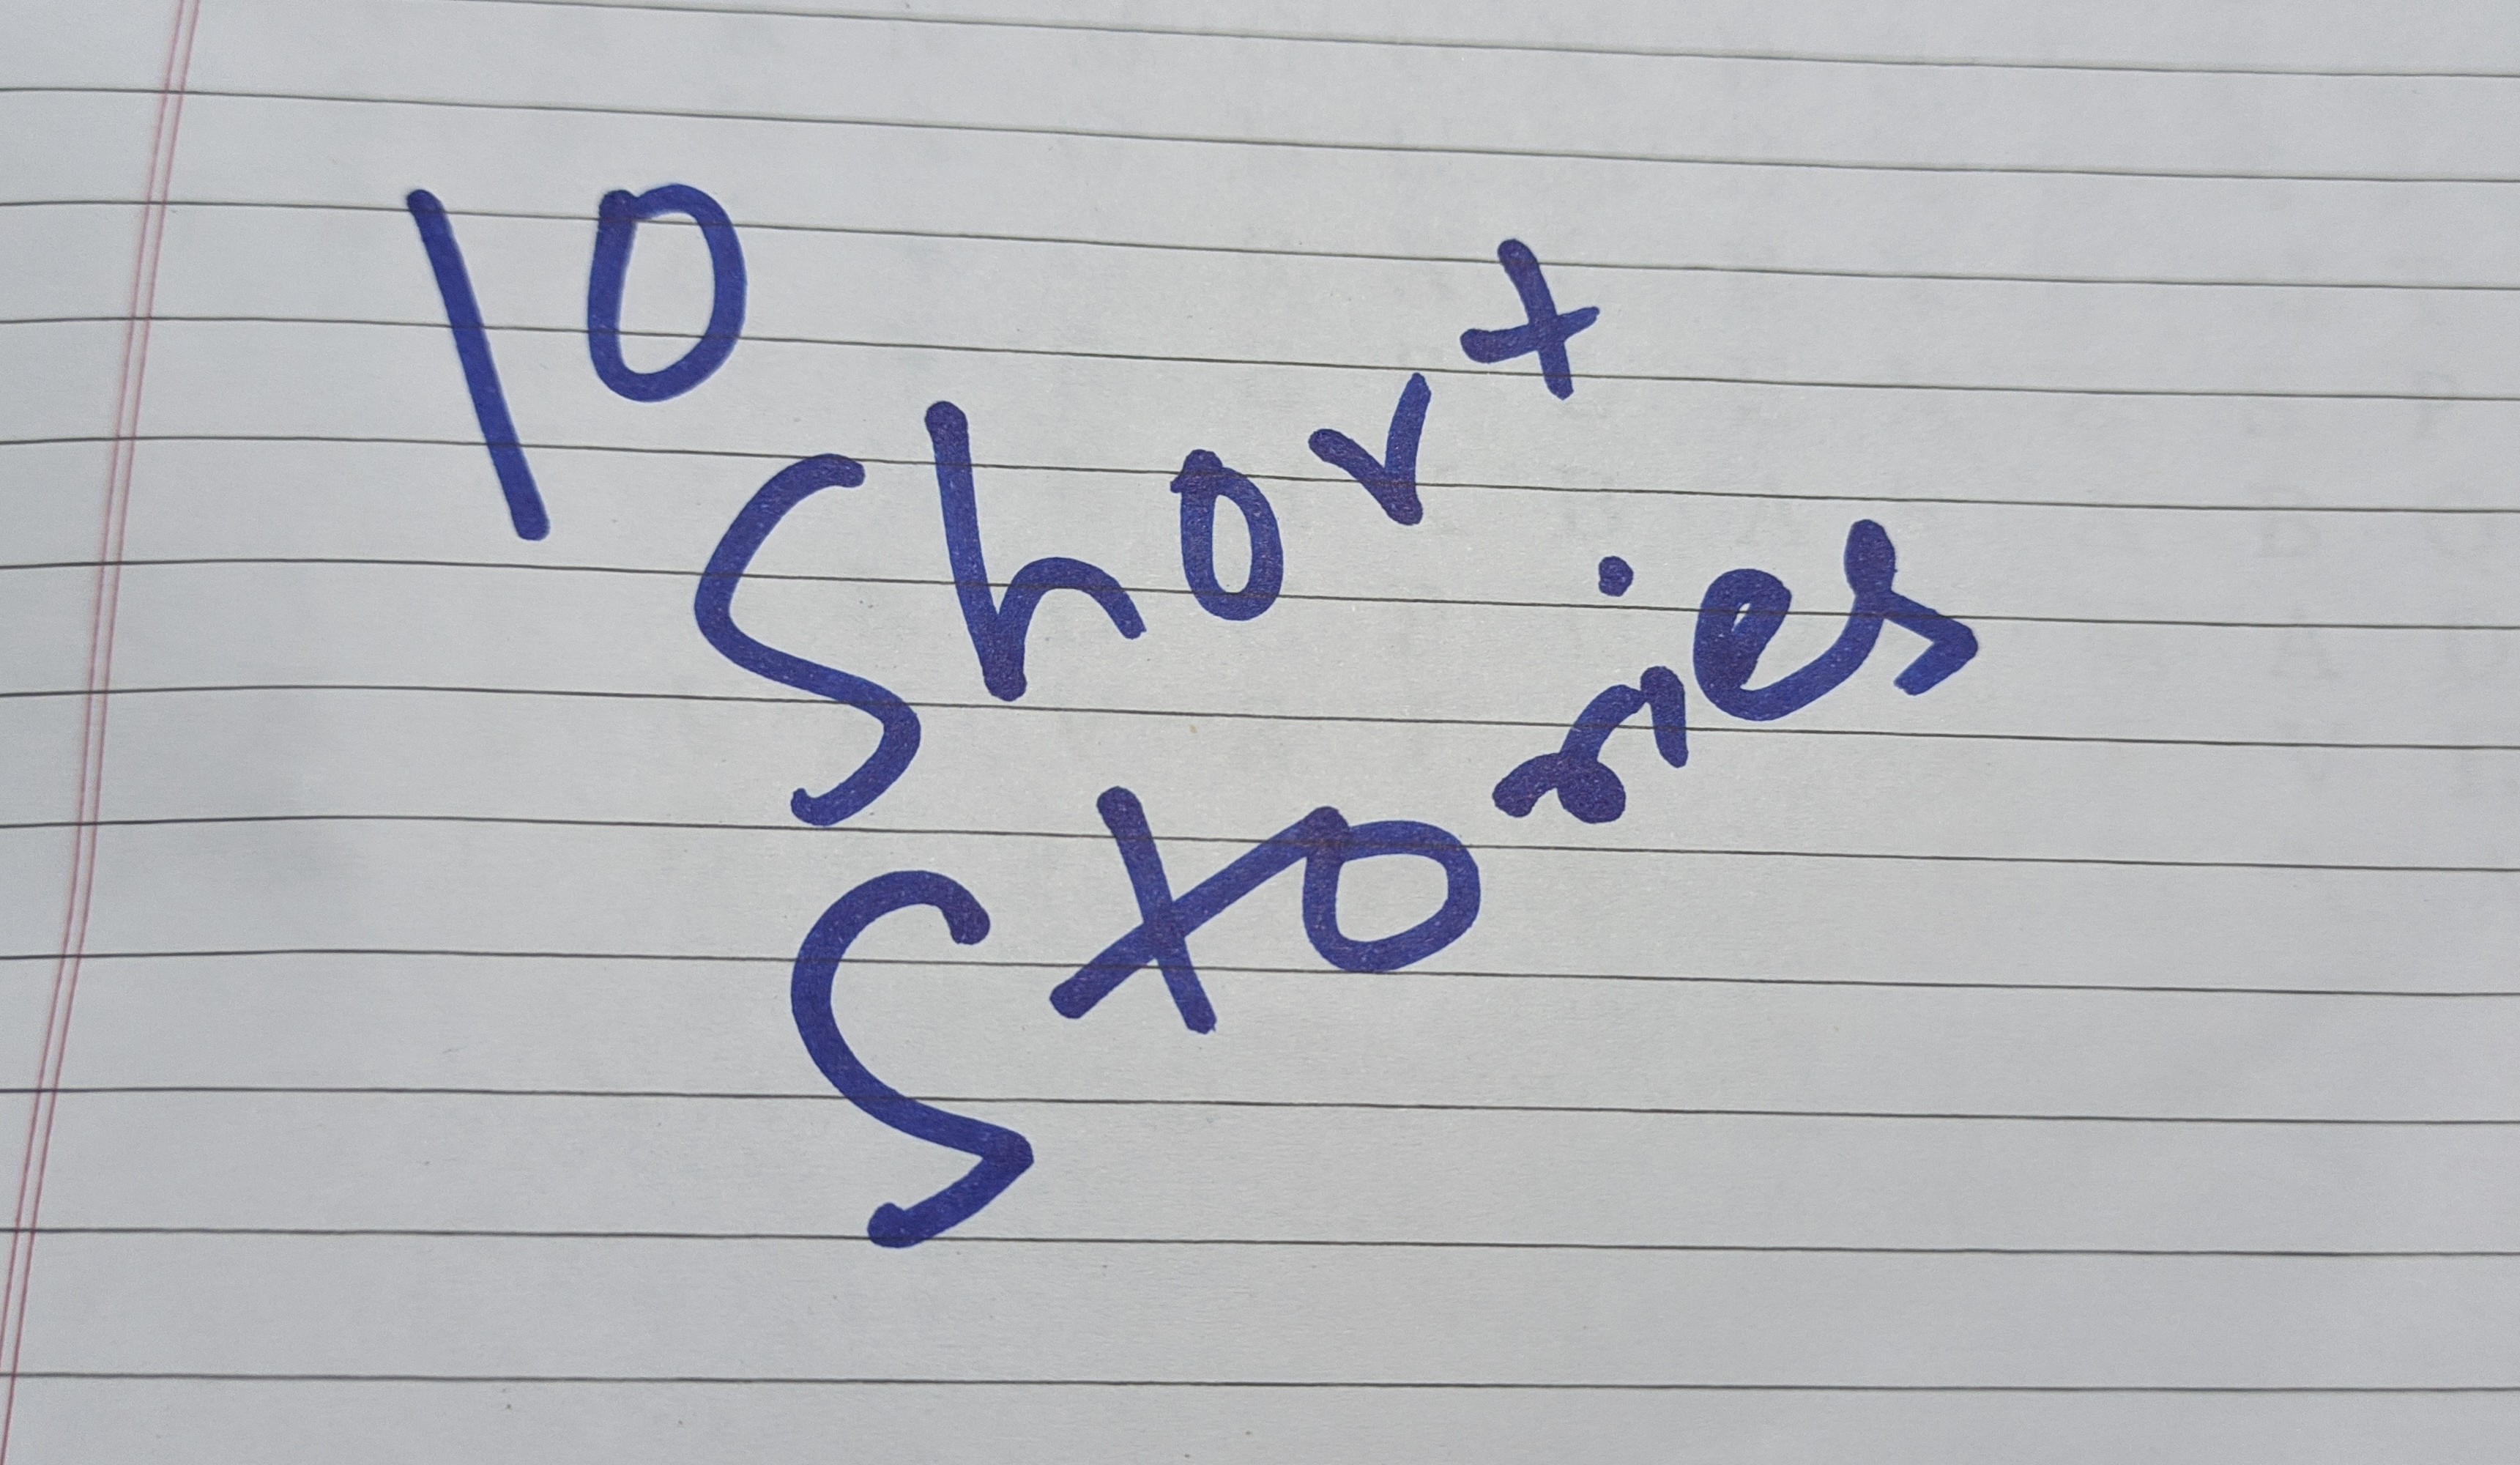 Short Stories are coming!!